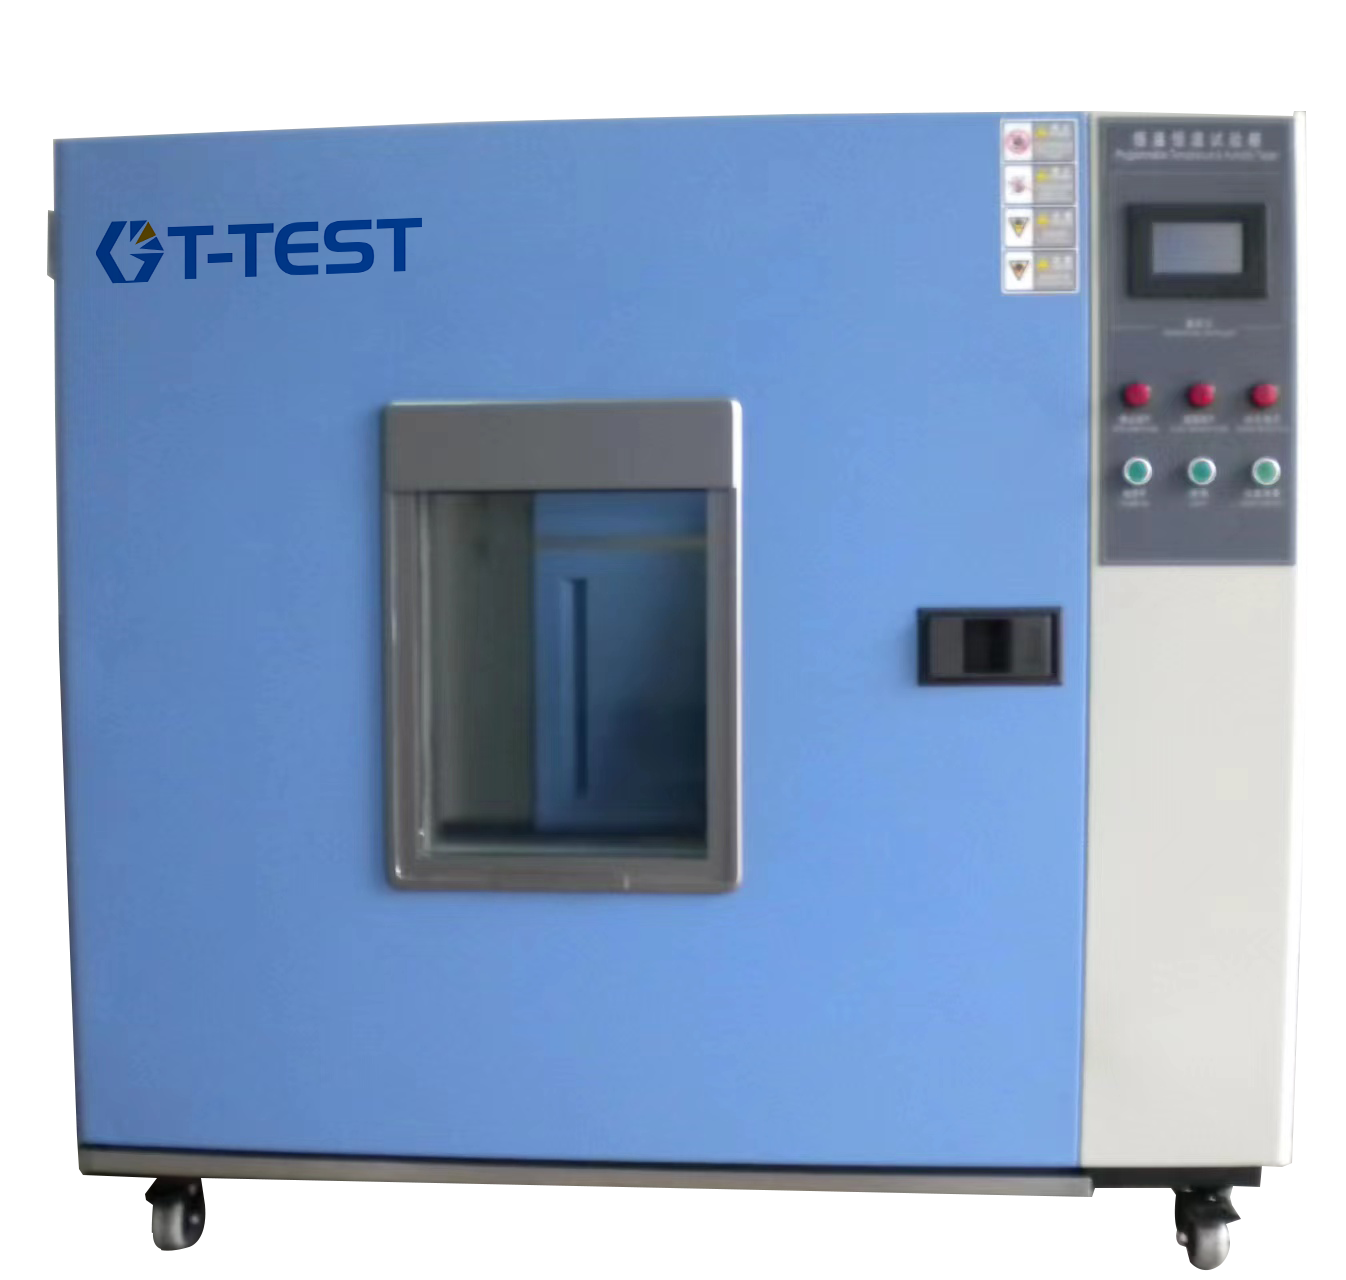 thermal stability testing equipment from China manufacturer - GT-TEST